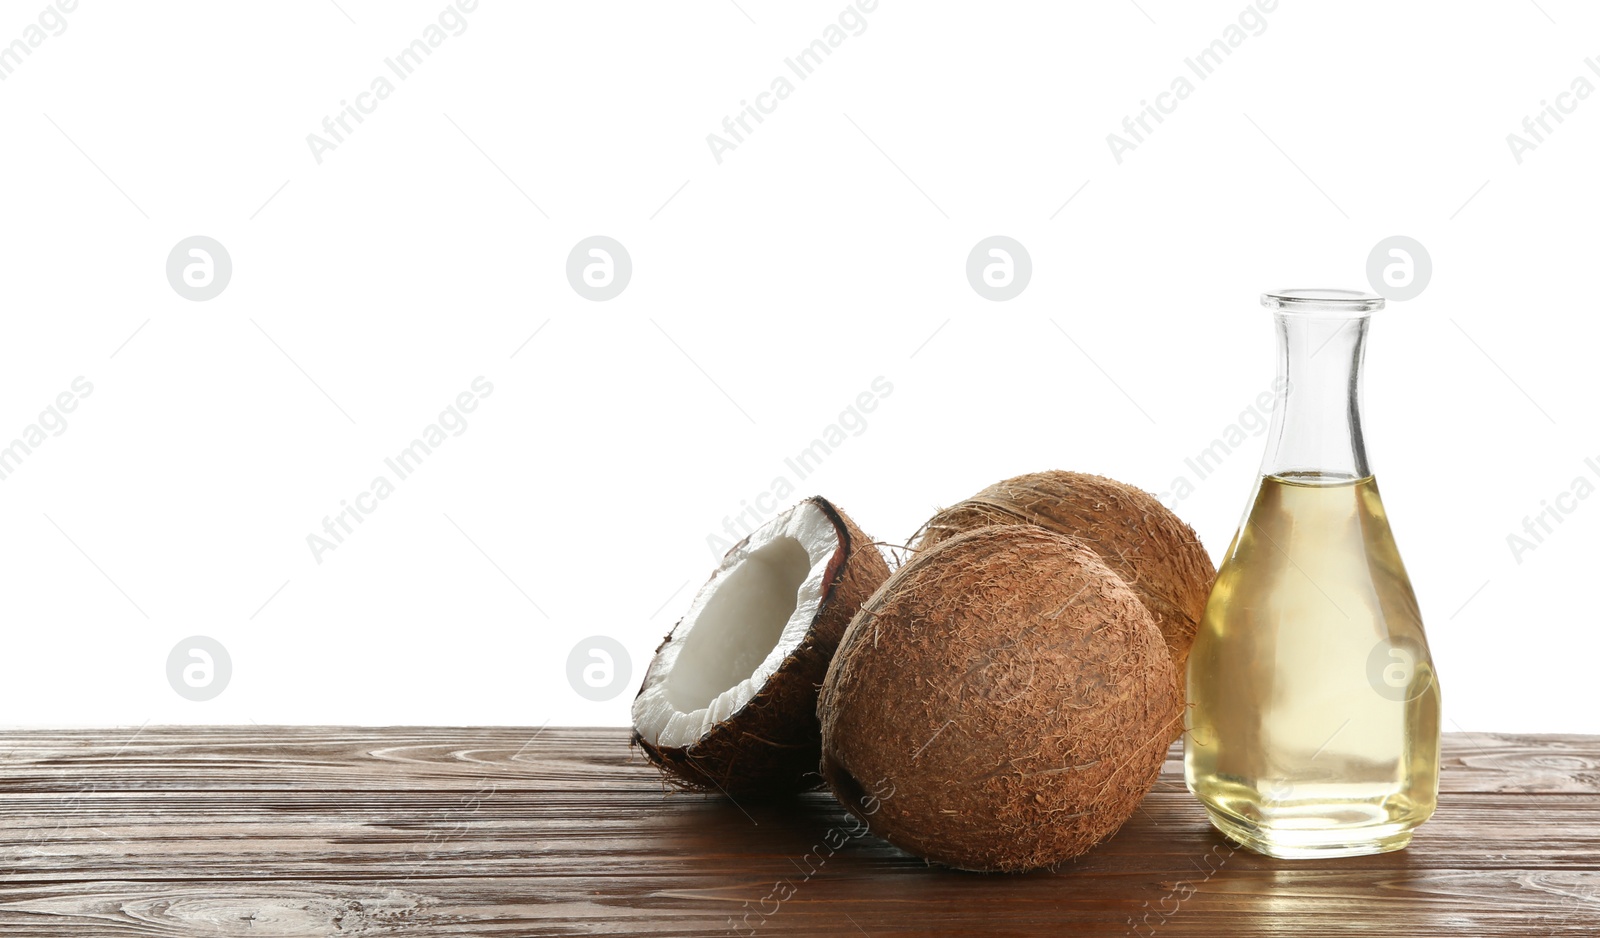 Photo of Ripe coconuts and bottle with natural organic oil on wooden table against white background